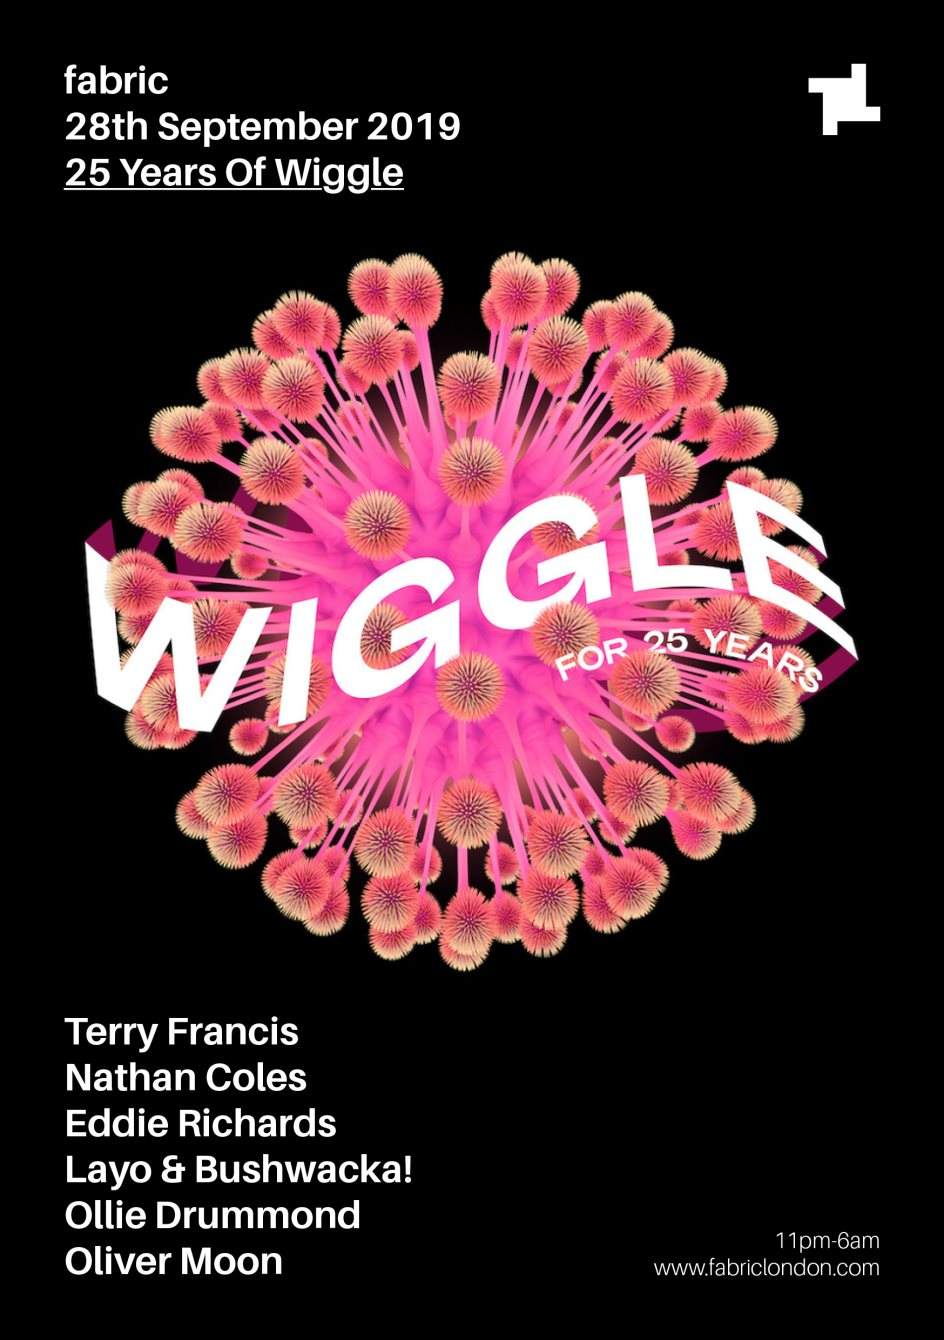 fabric: 25 Years of Wiggle - フライヤー裏